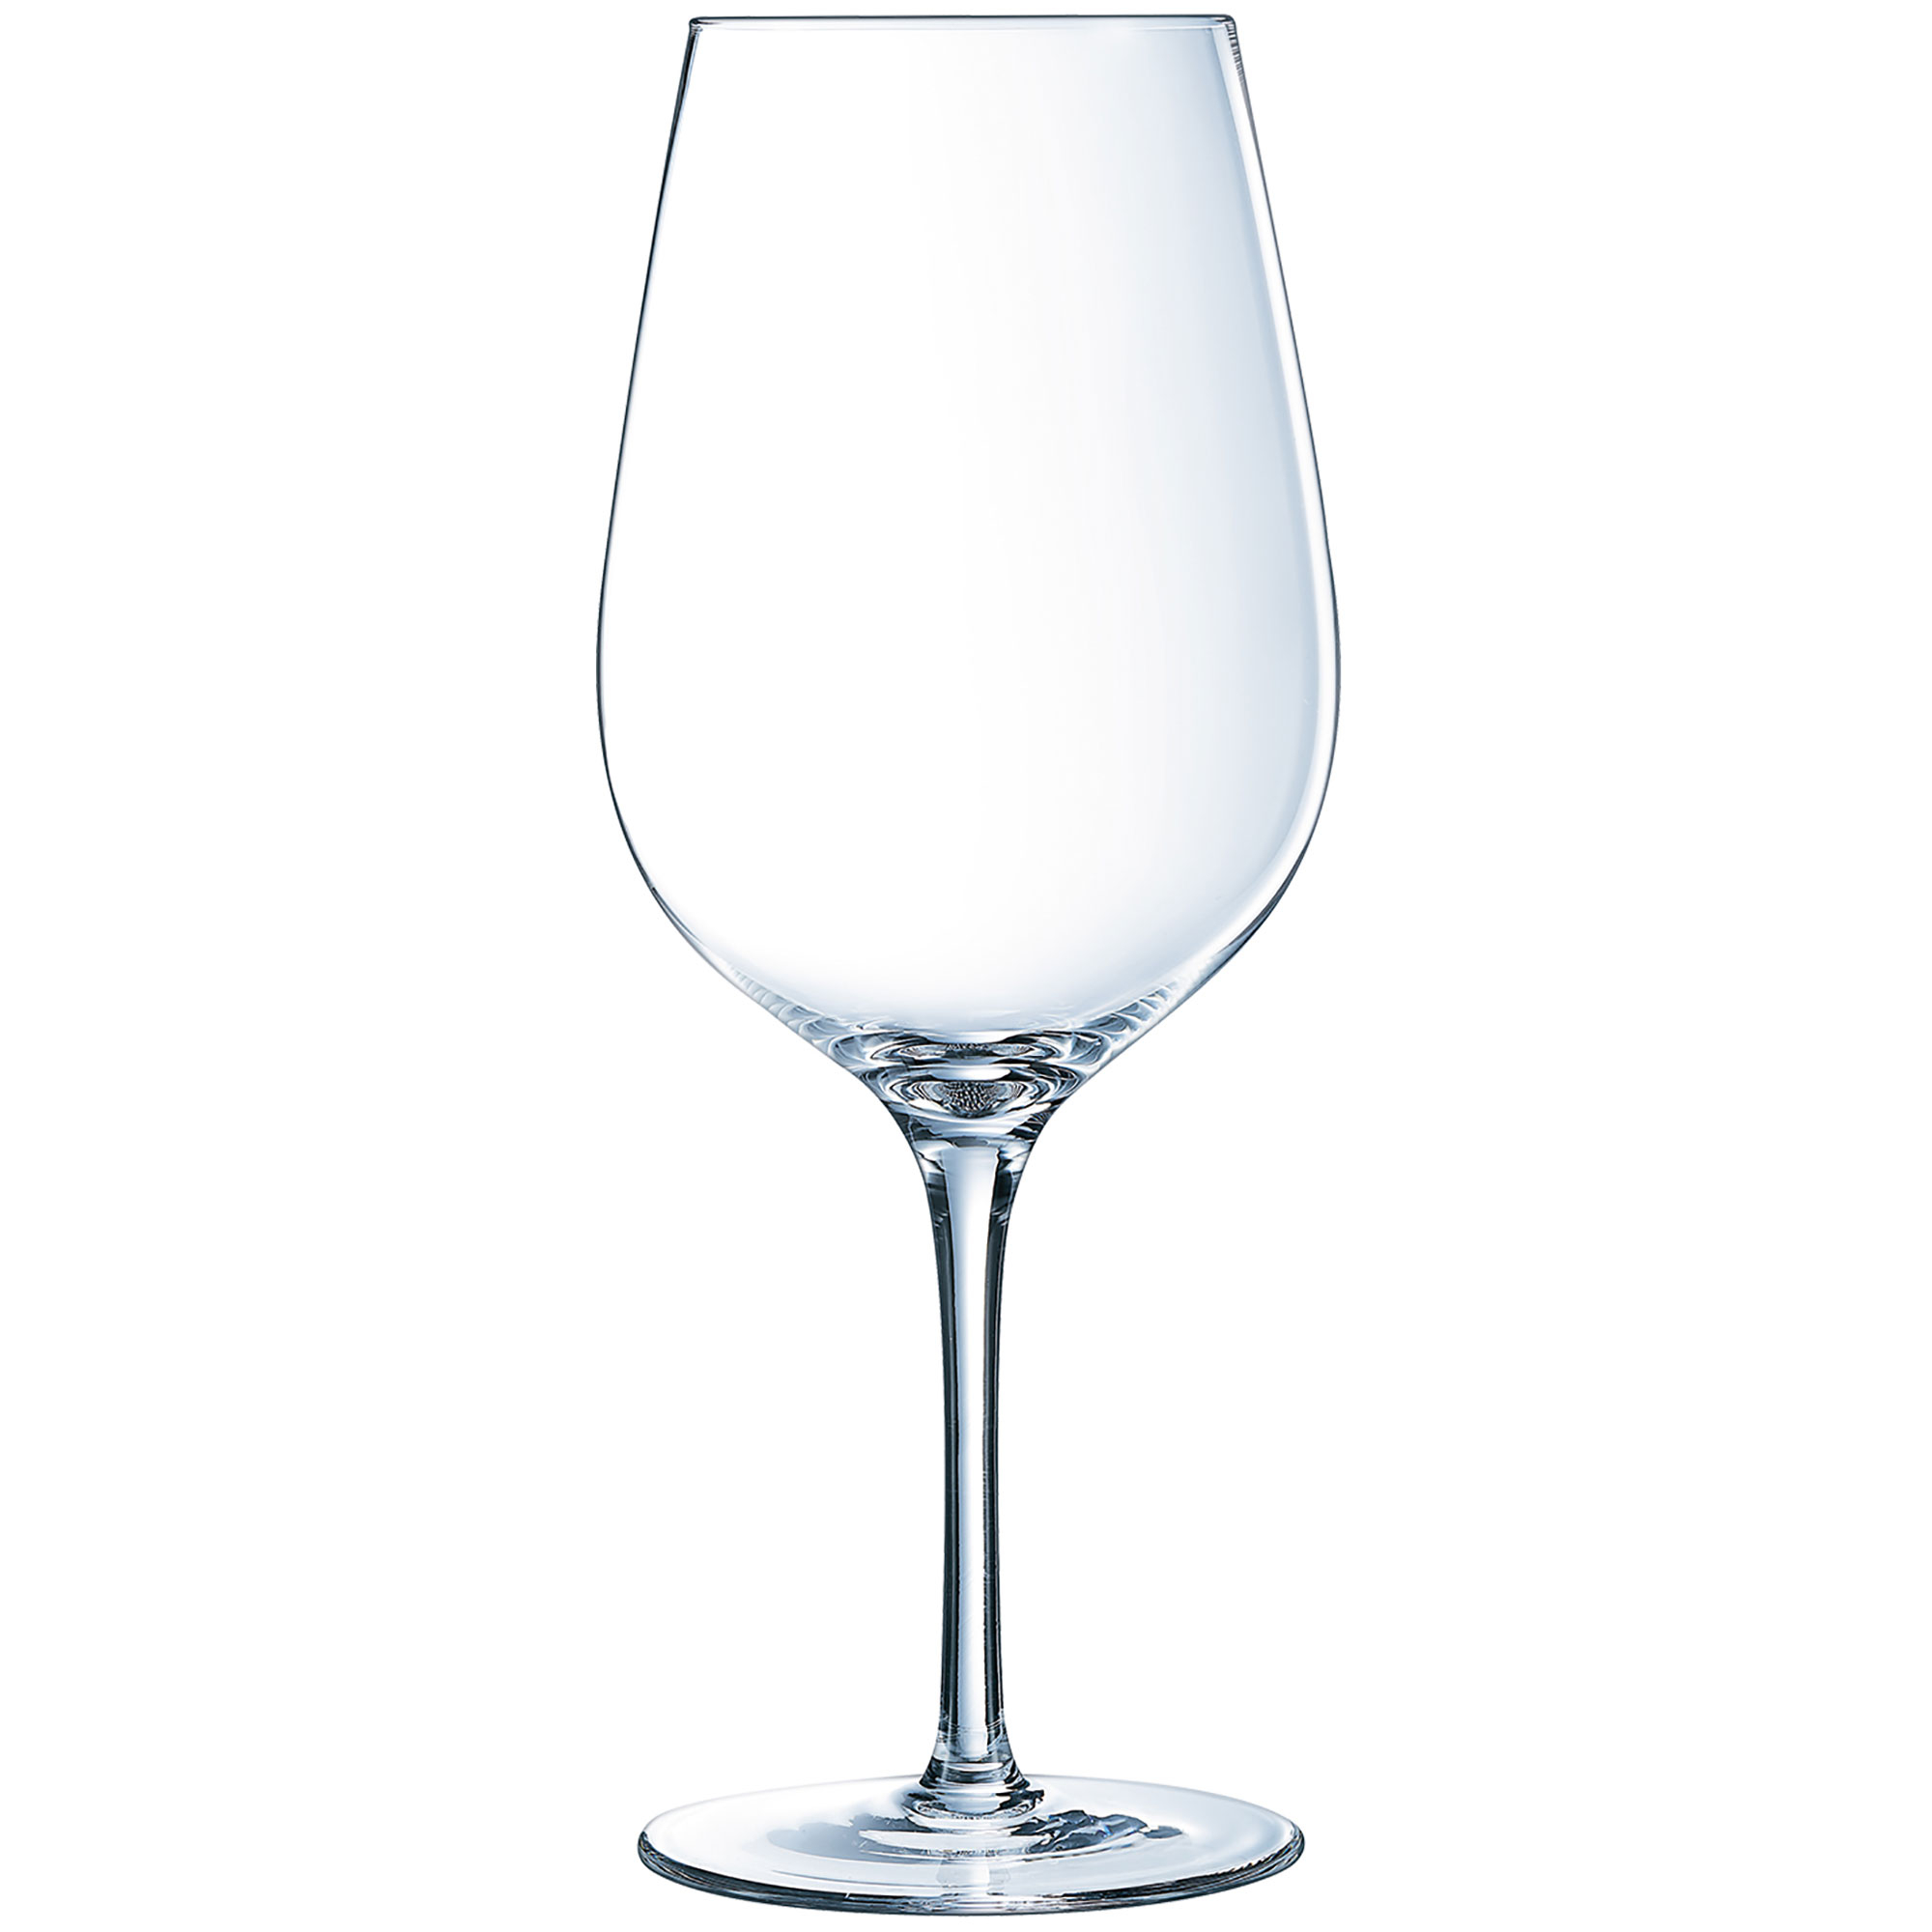 Bordeaux wine glass Sequence, C&S - 620ml